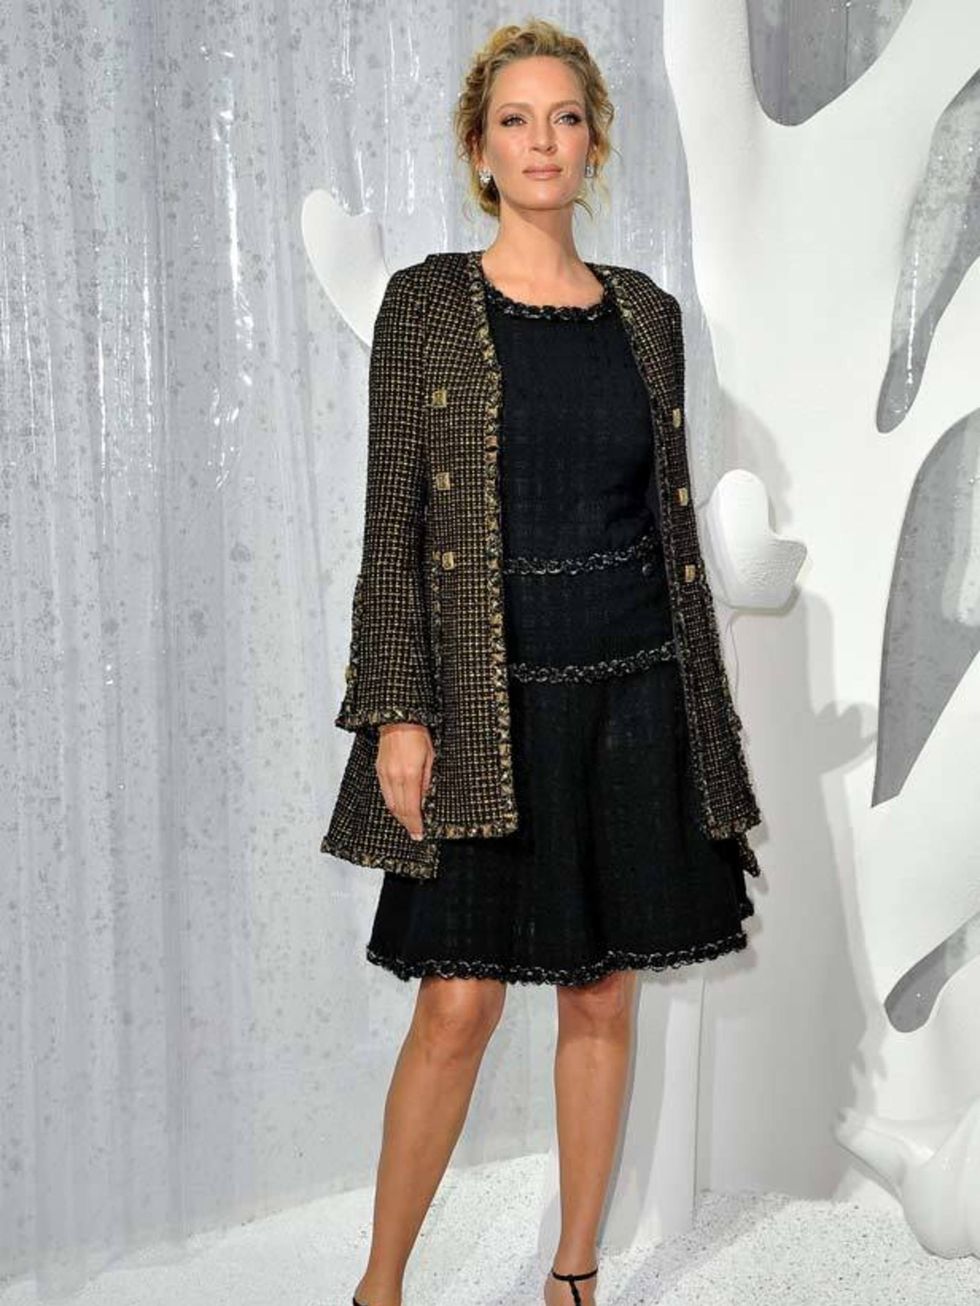 <p><a href="http://www.elleuk.com/content/search?SearchText=Uma+Thurman+&amp;SearchButton=Search">Uma Thurman</a> wearing a <a href="http://www.elleuk.com/catwalk/collections/chanel/couture-aw-2011">Chanel</a> jacket &amp; dress for the house's Spring/Sum